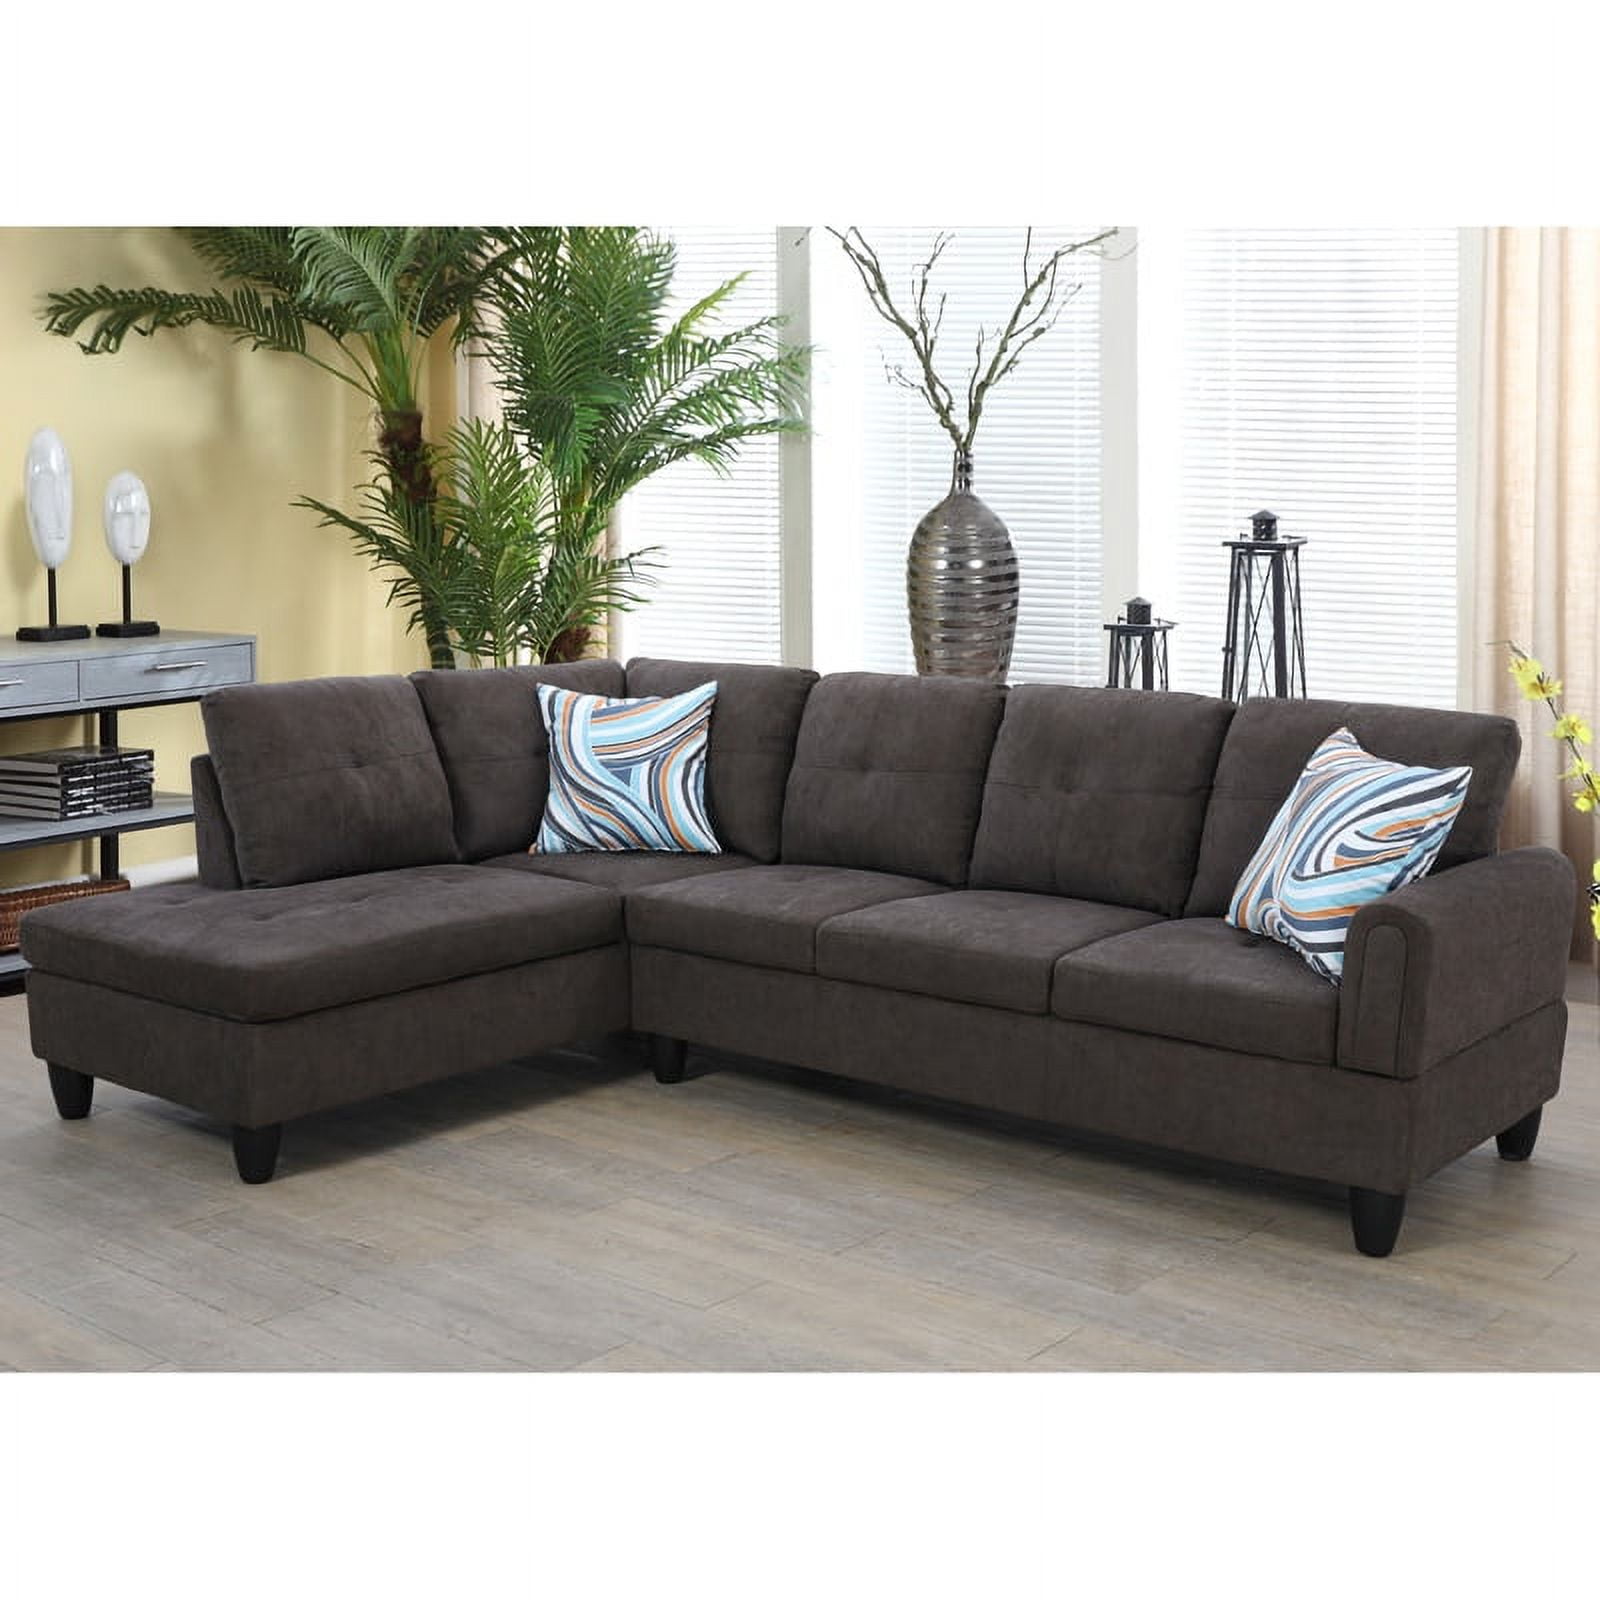 Hommoo Convertible Sectional Sofa Couch